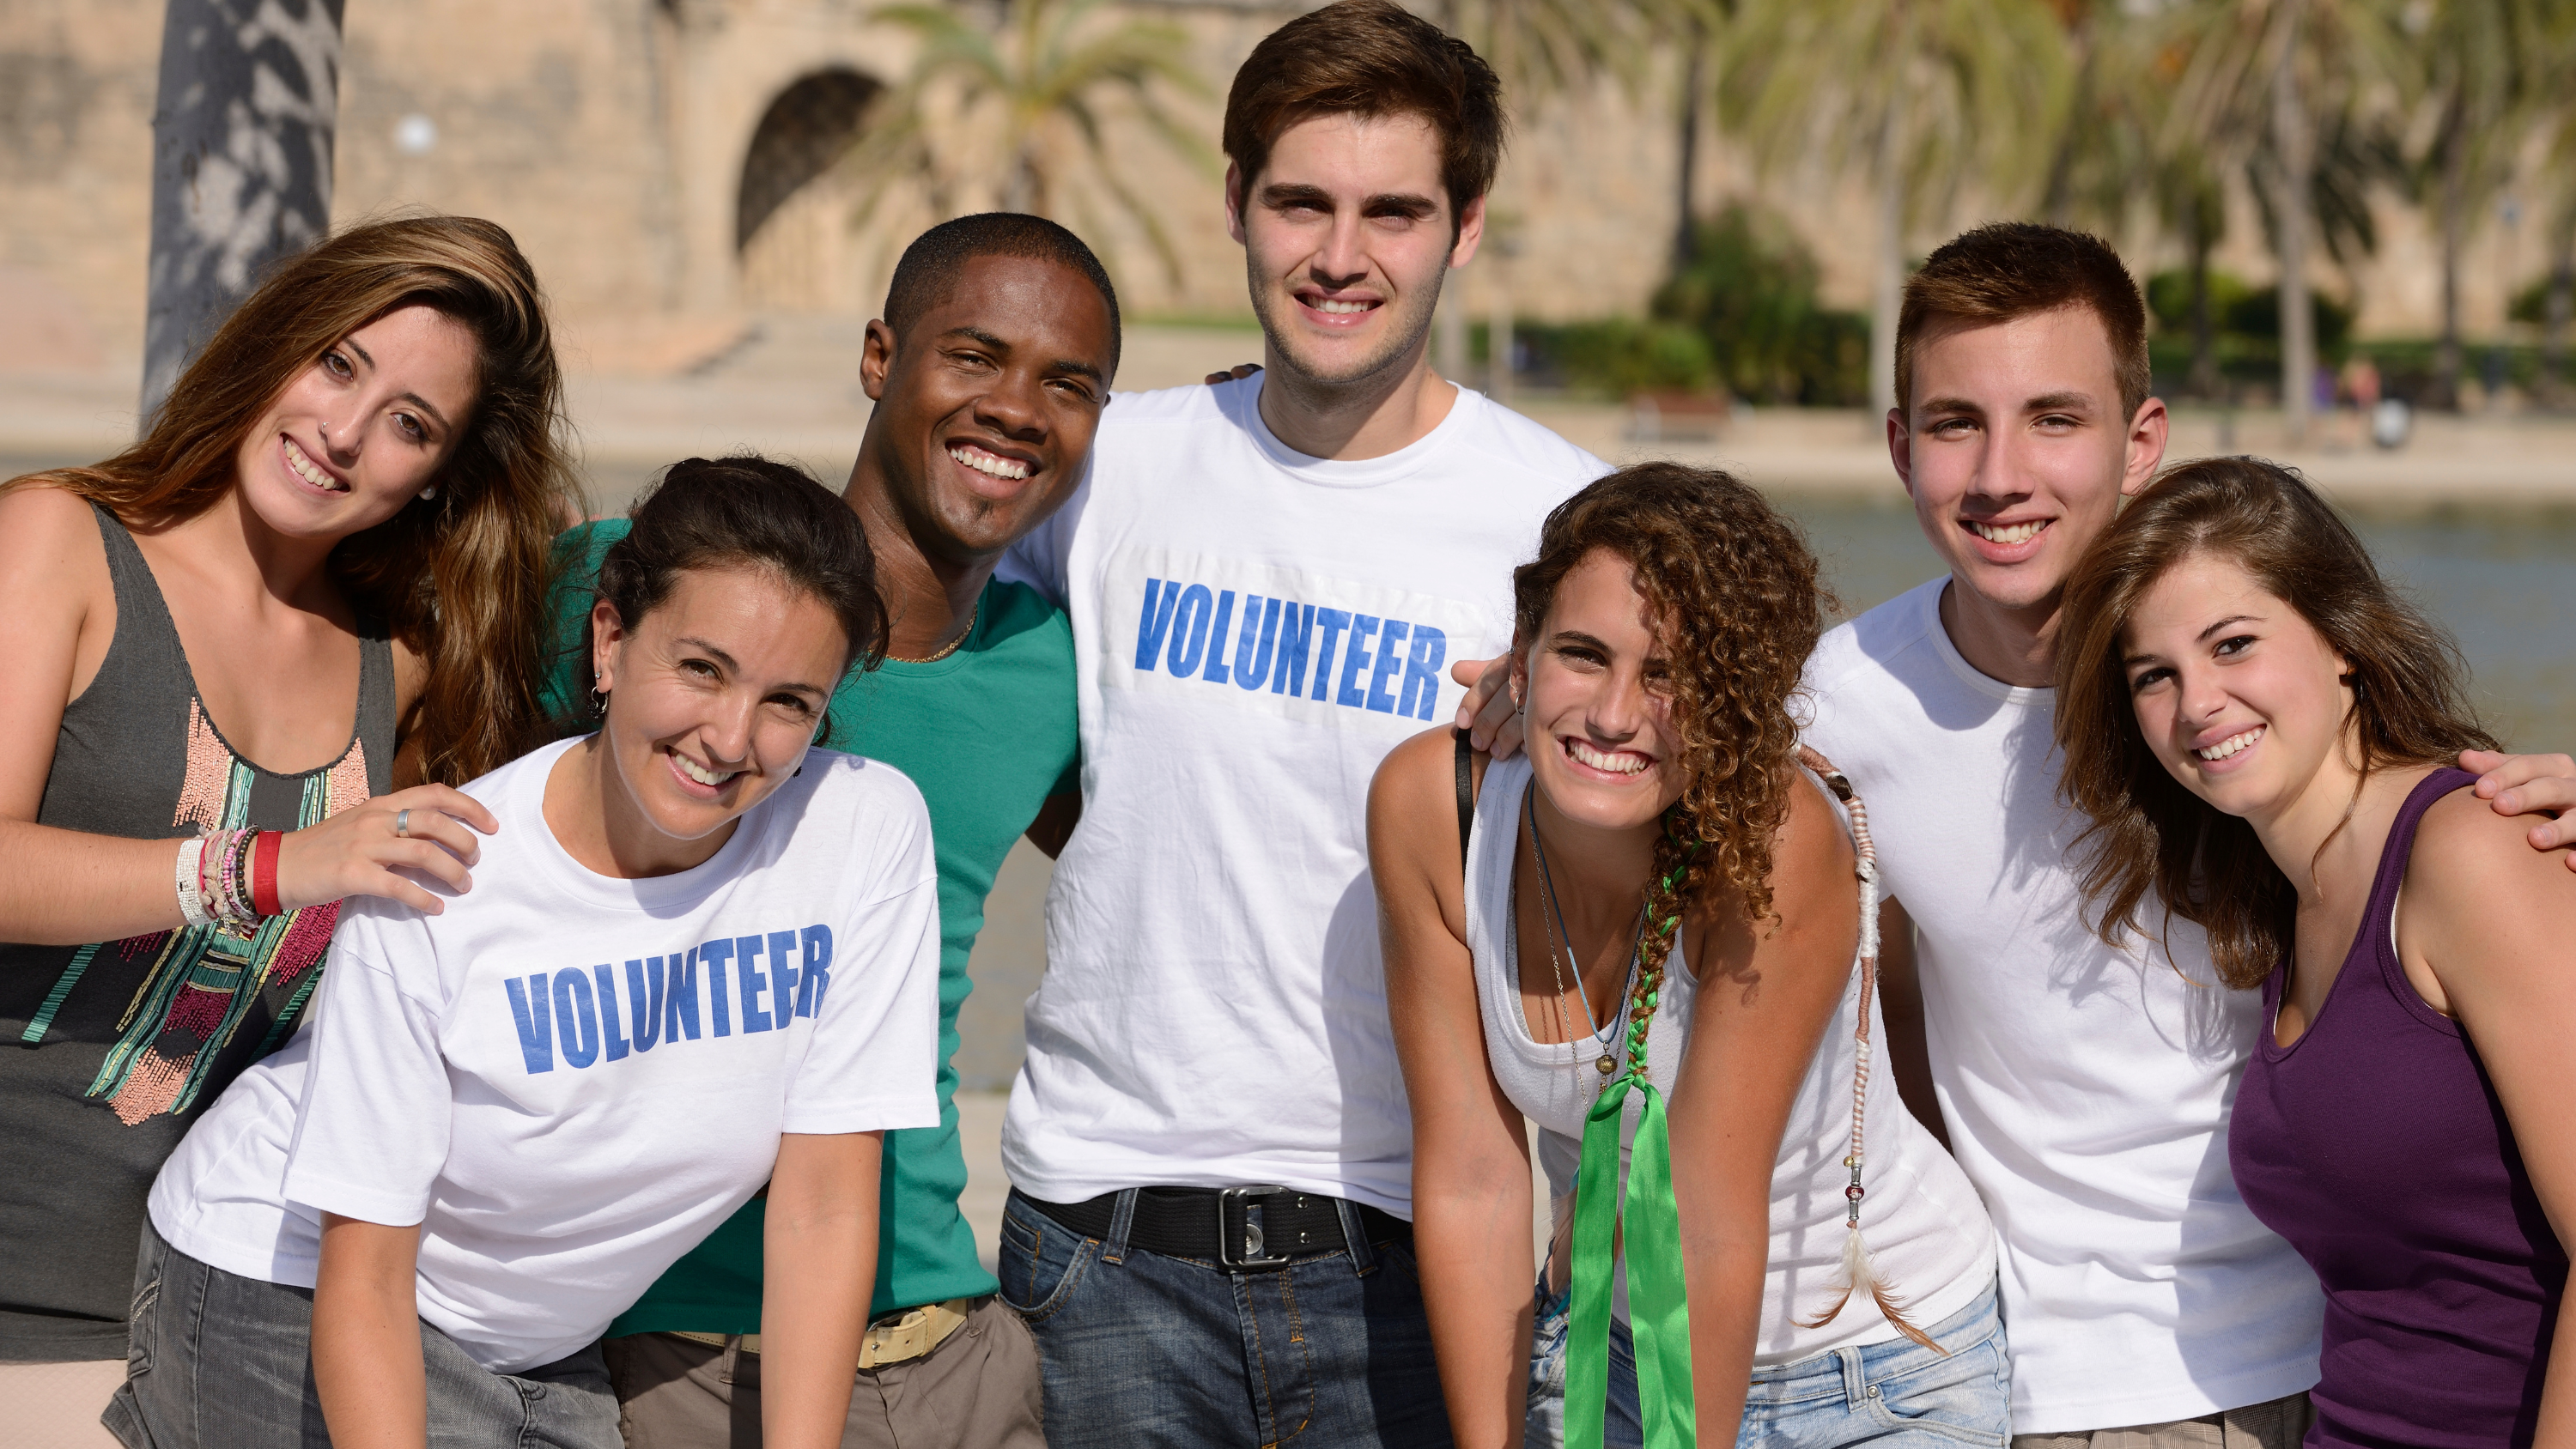 Volunteering: A Proven Way To Improve Employee Well-Being